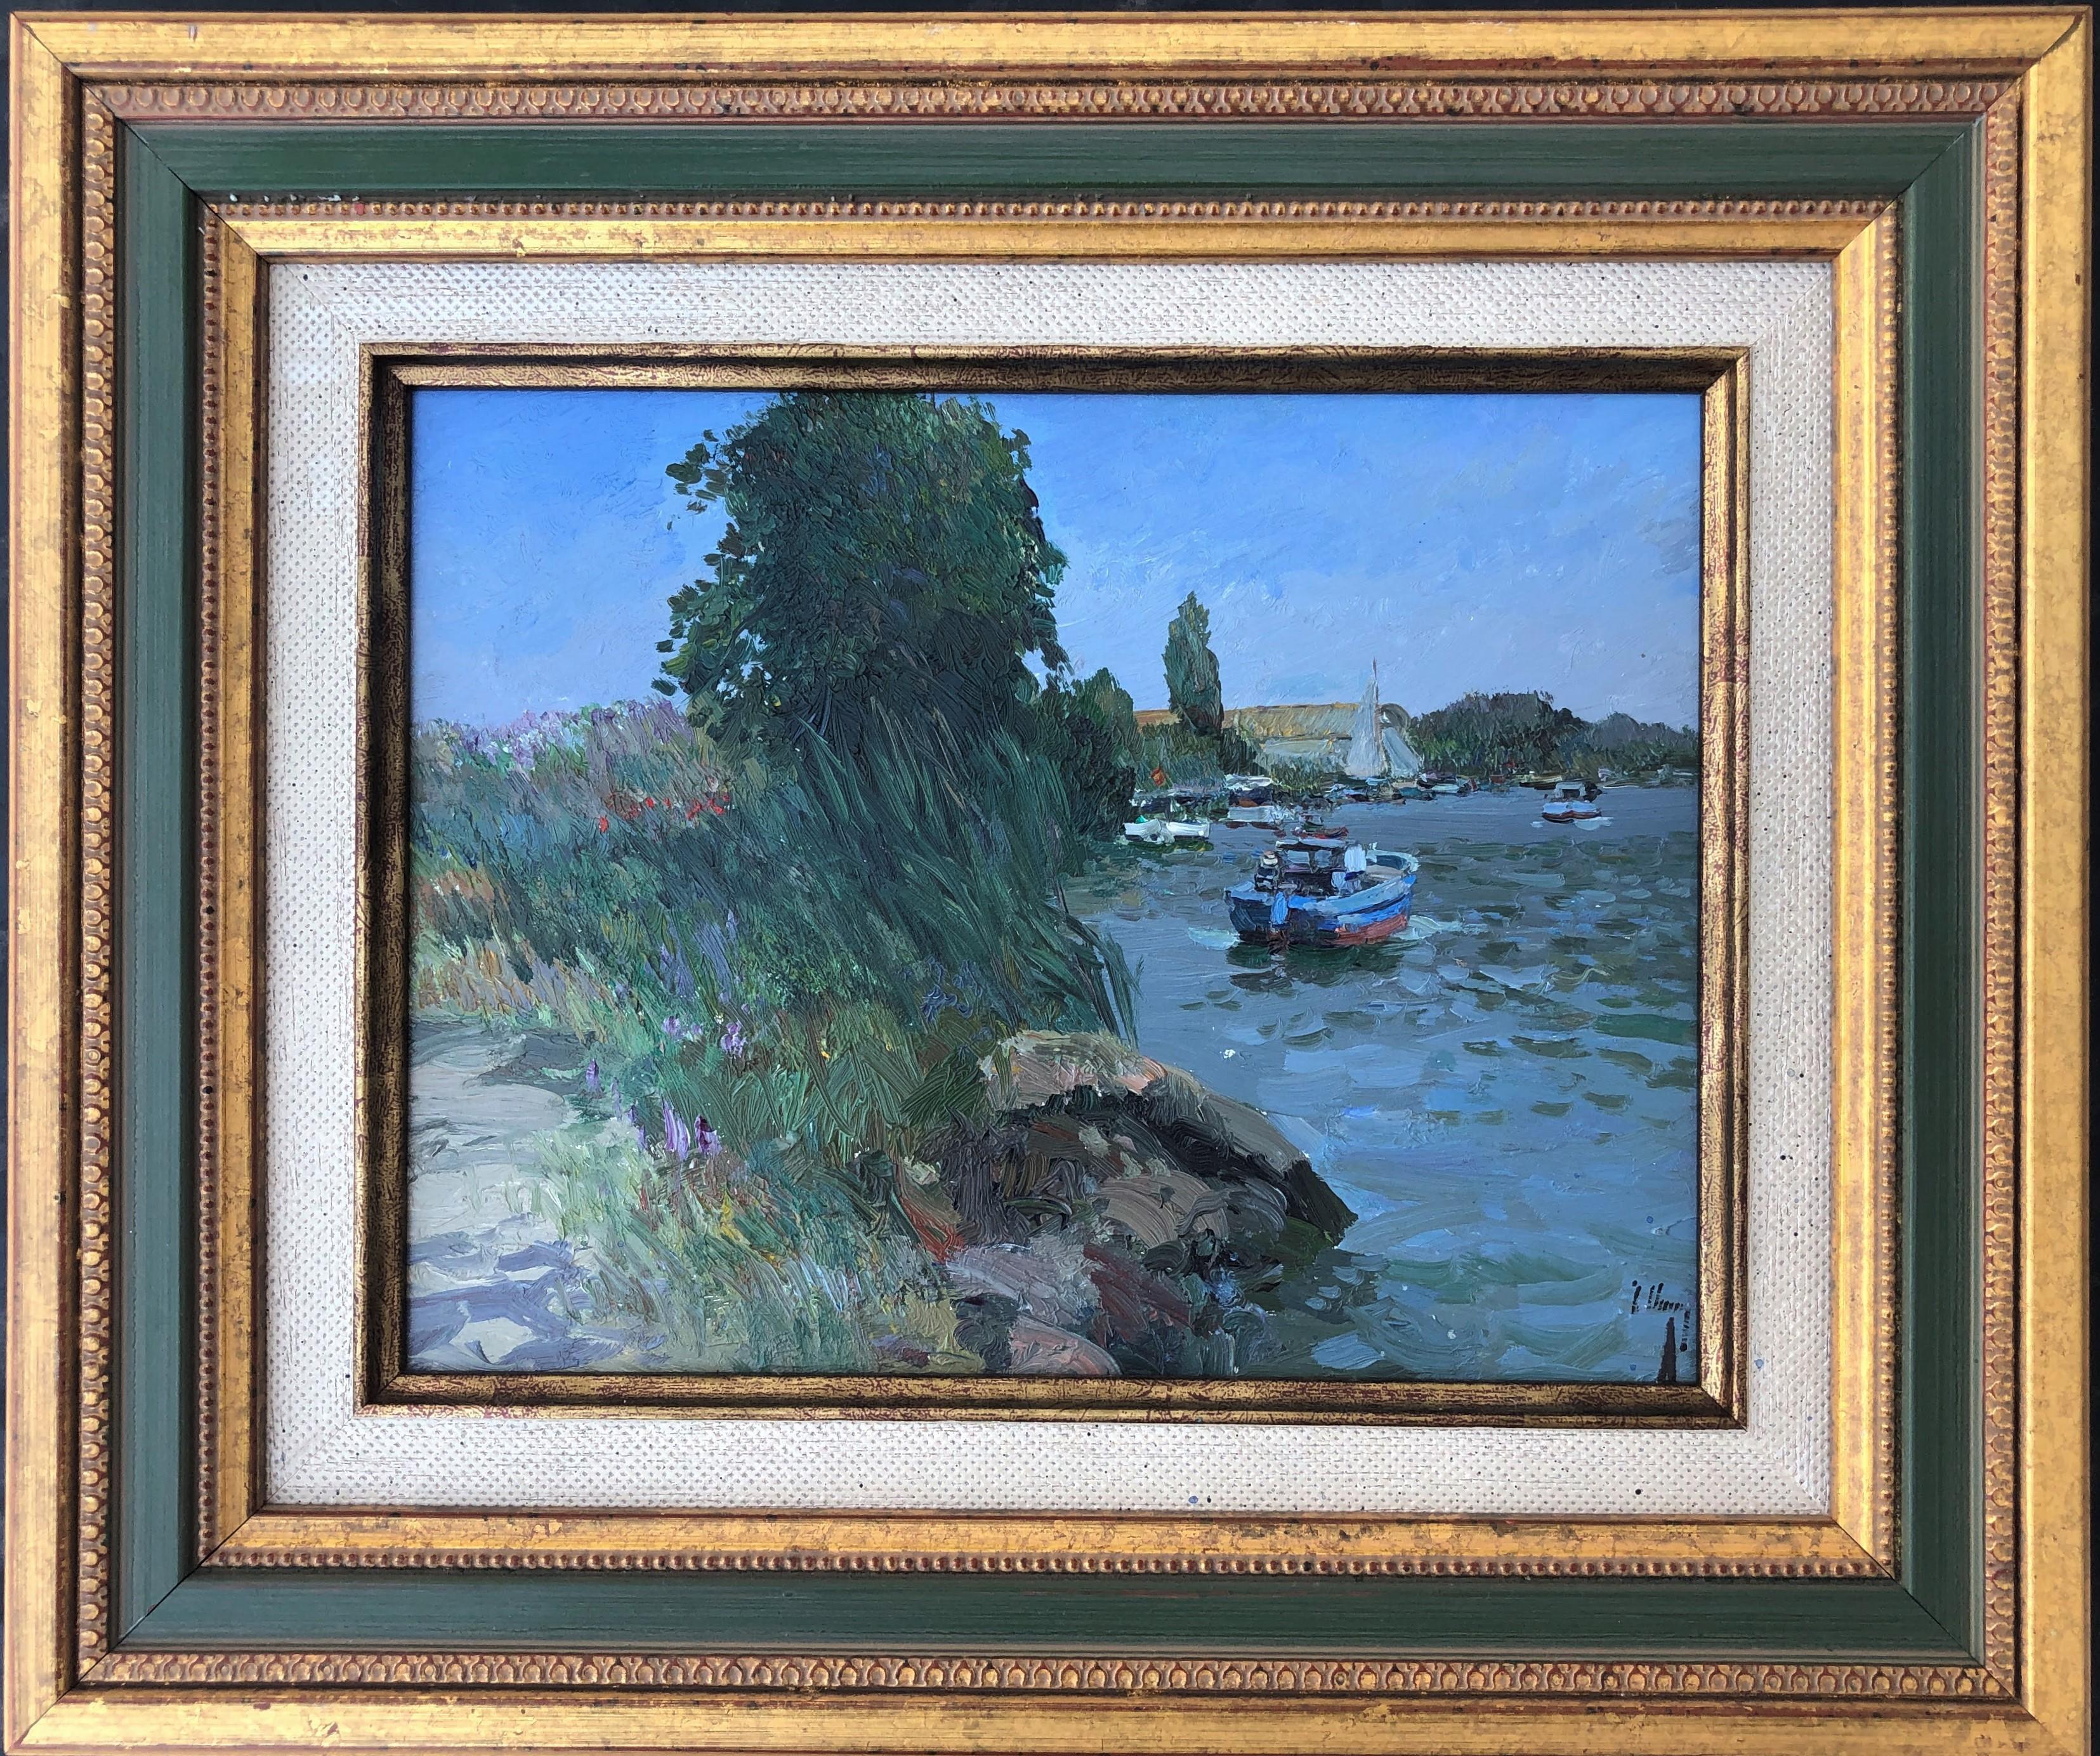 Jucar river Cullera Valencia seascape original oil on board painting - Painting by José Luis Checa